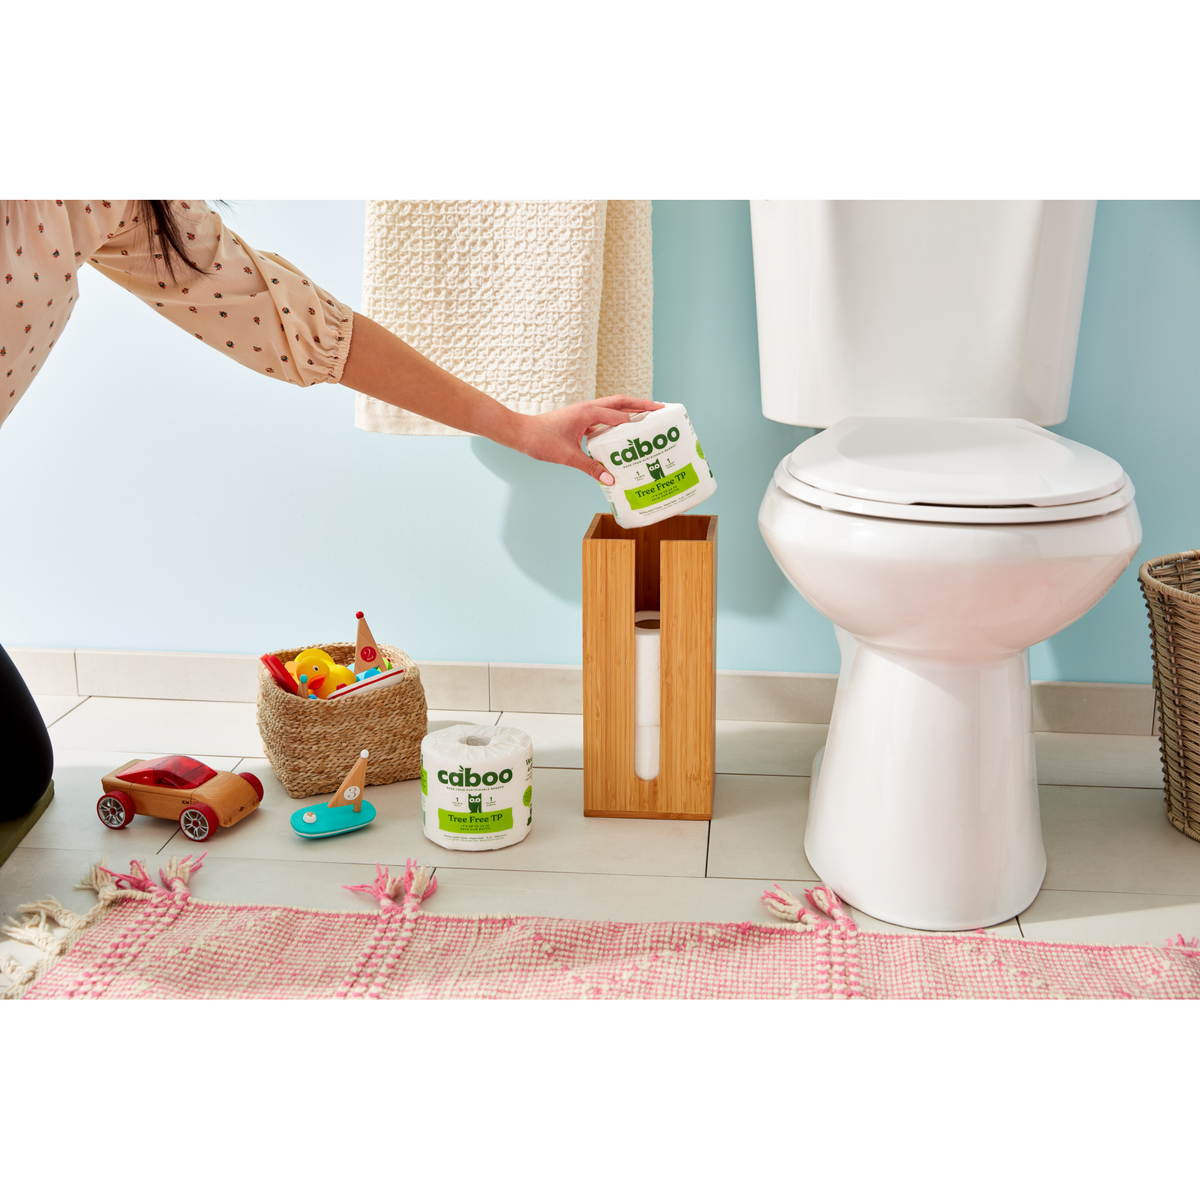 High Quality Bamboo Toilet Paper Holder with Toilet Brush Free